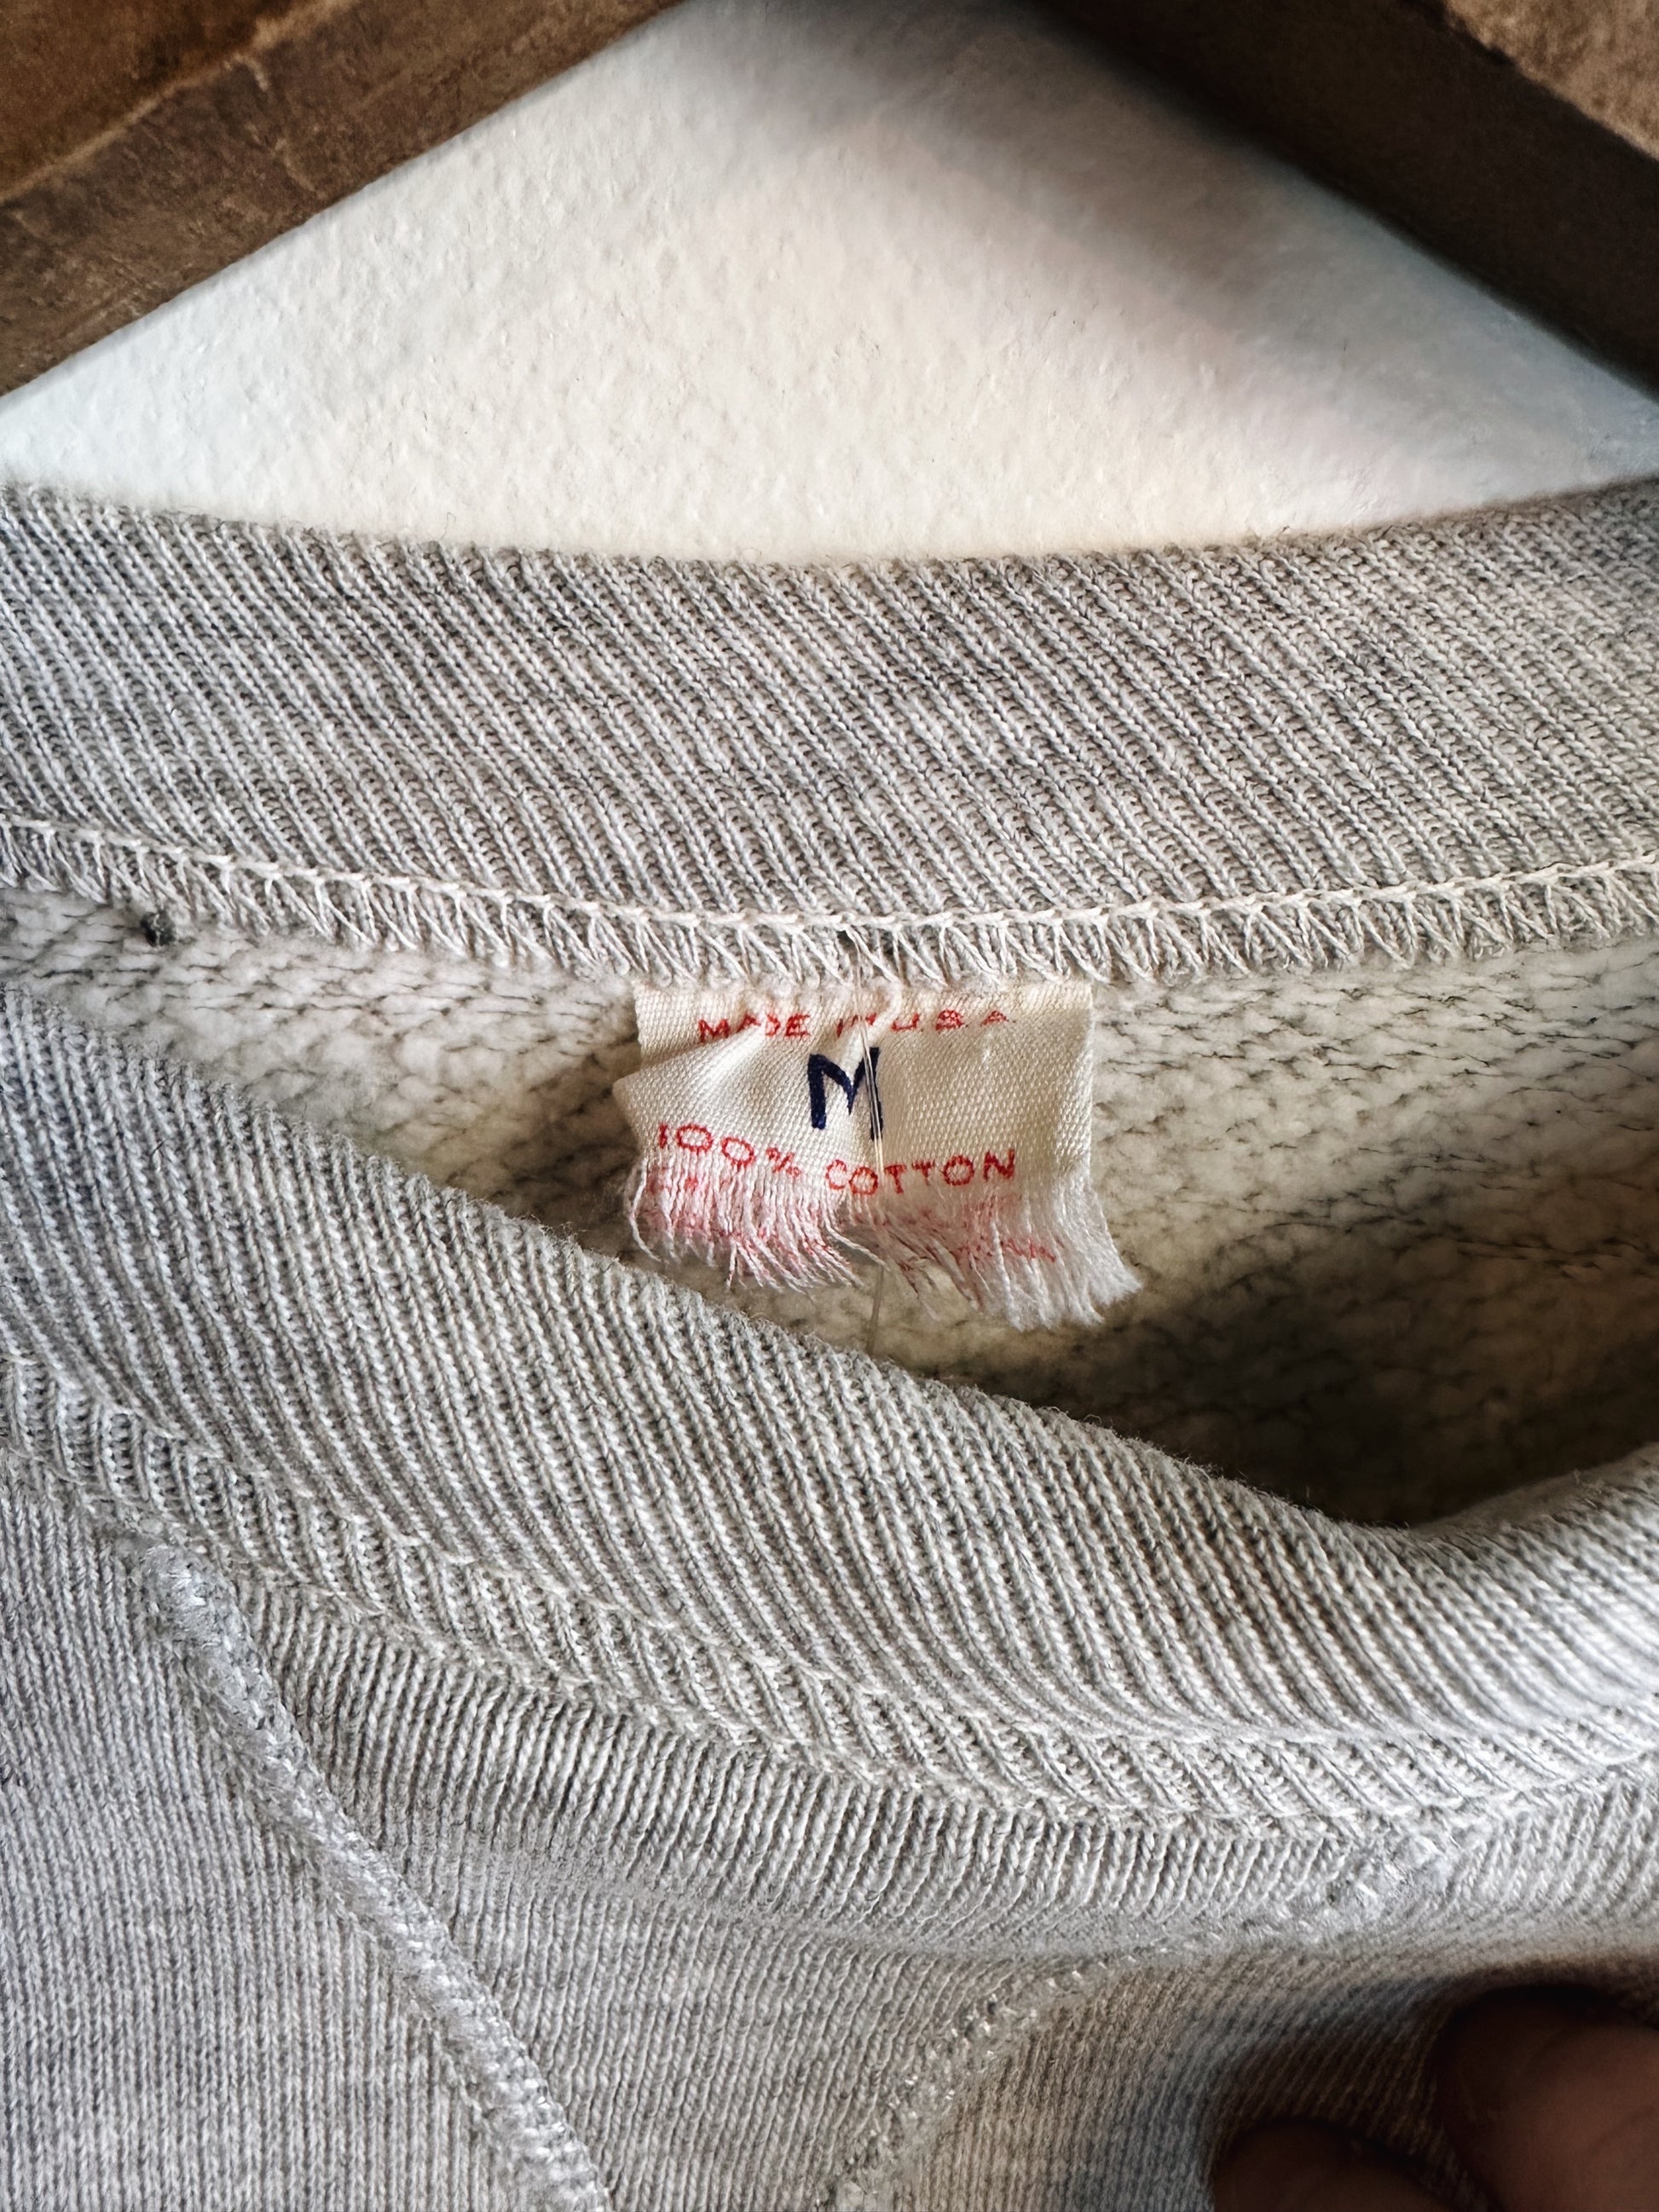 close up of tag- M 100% cotton 